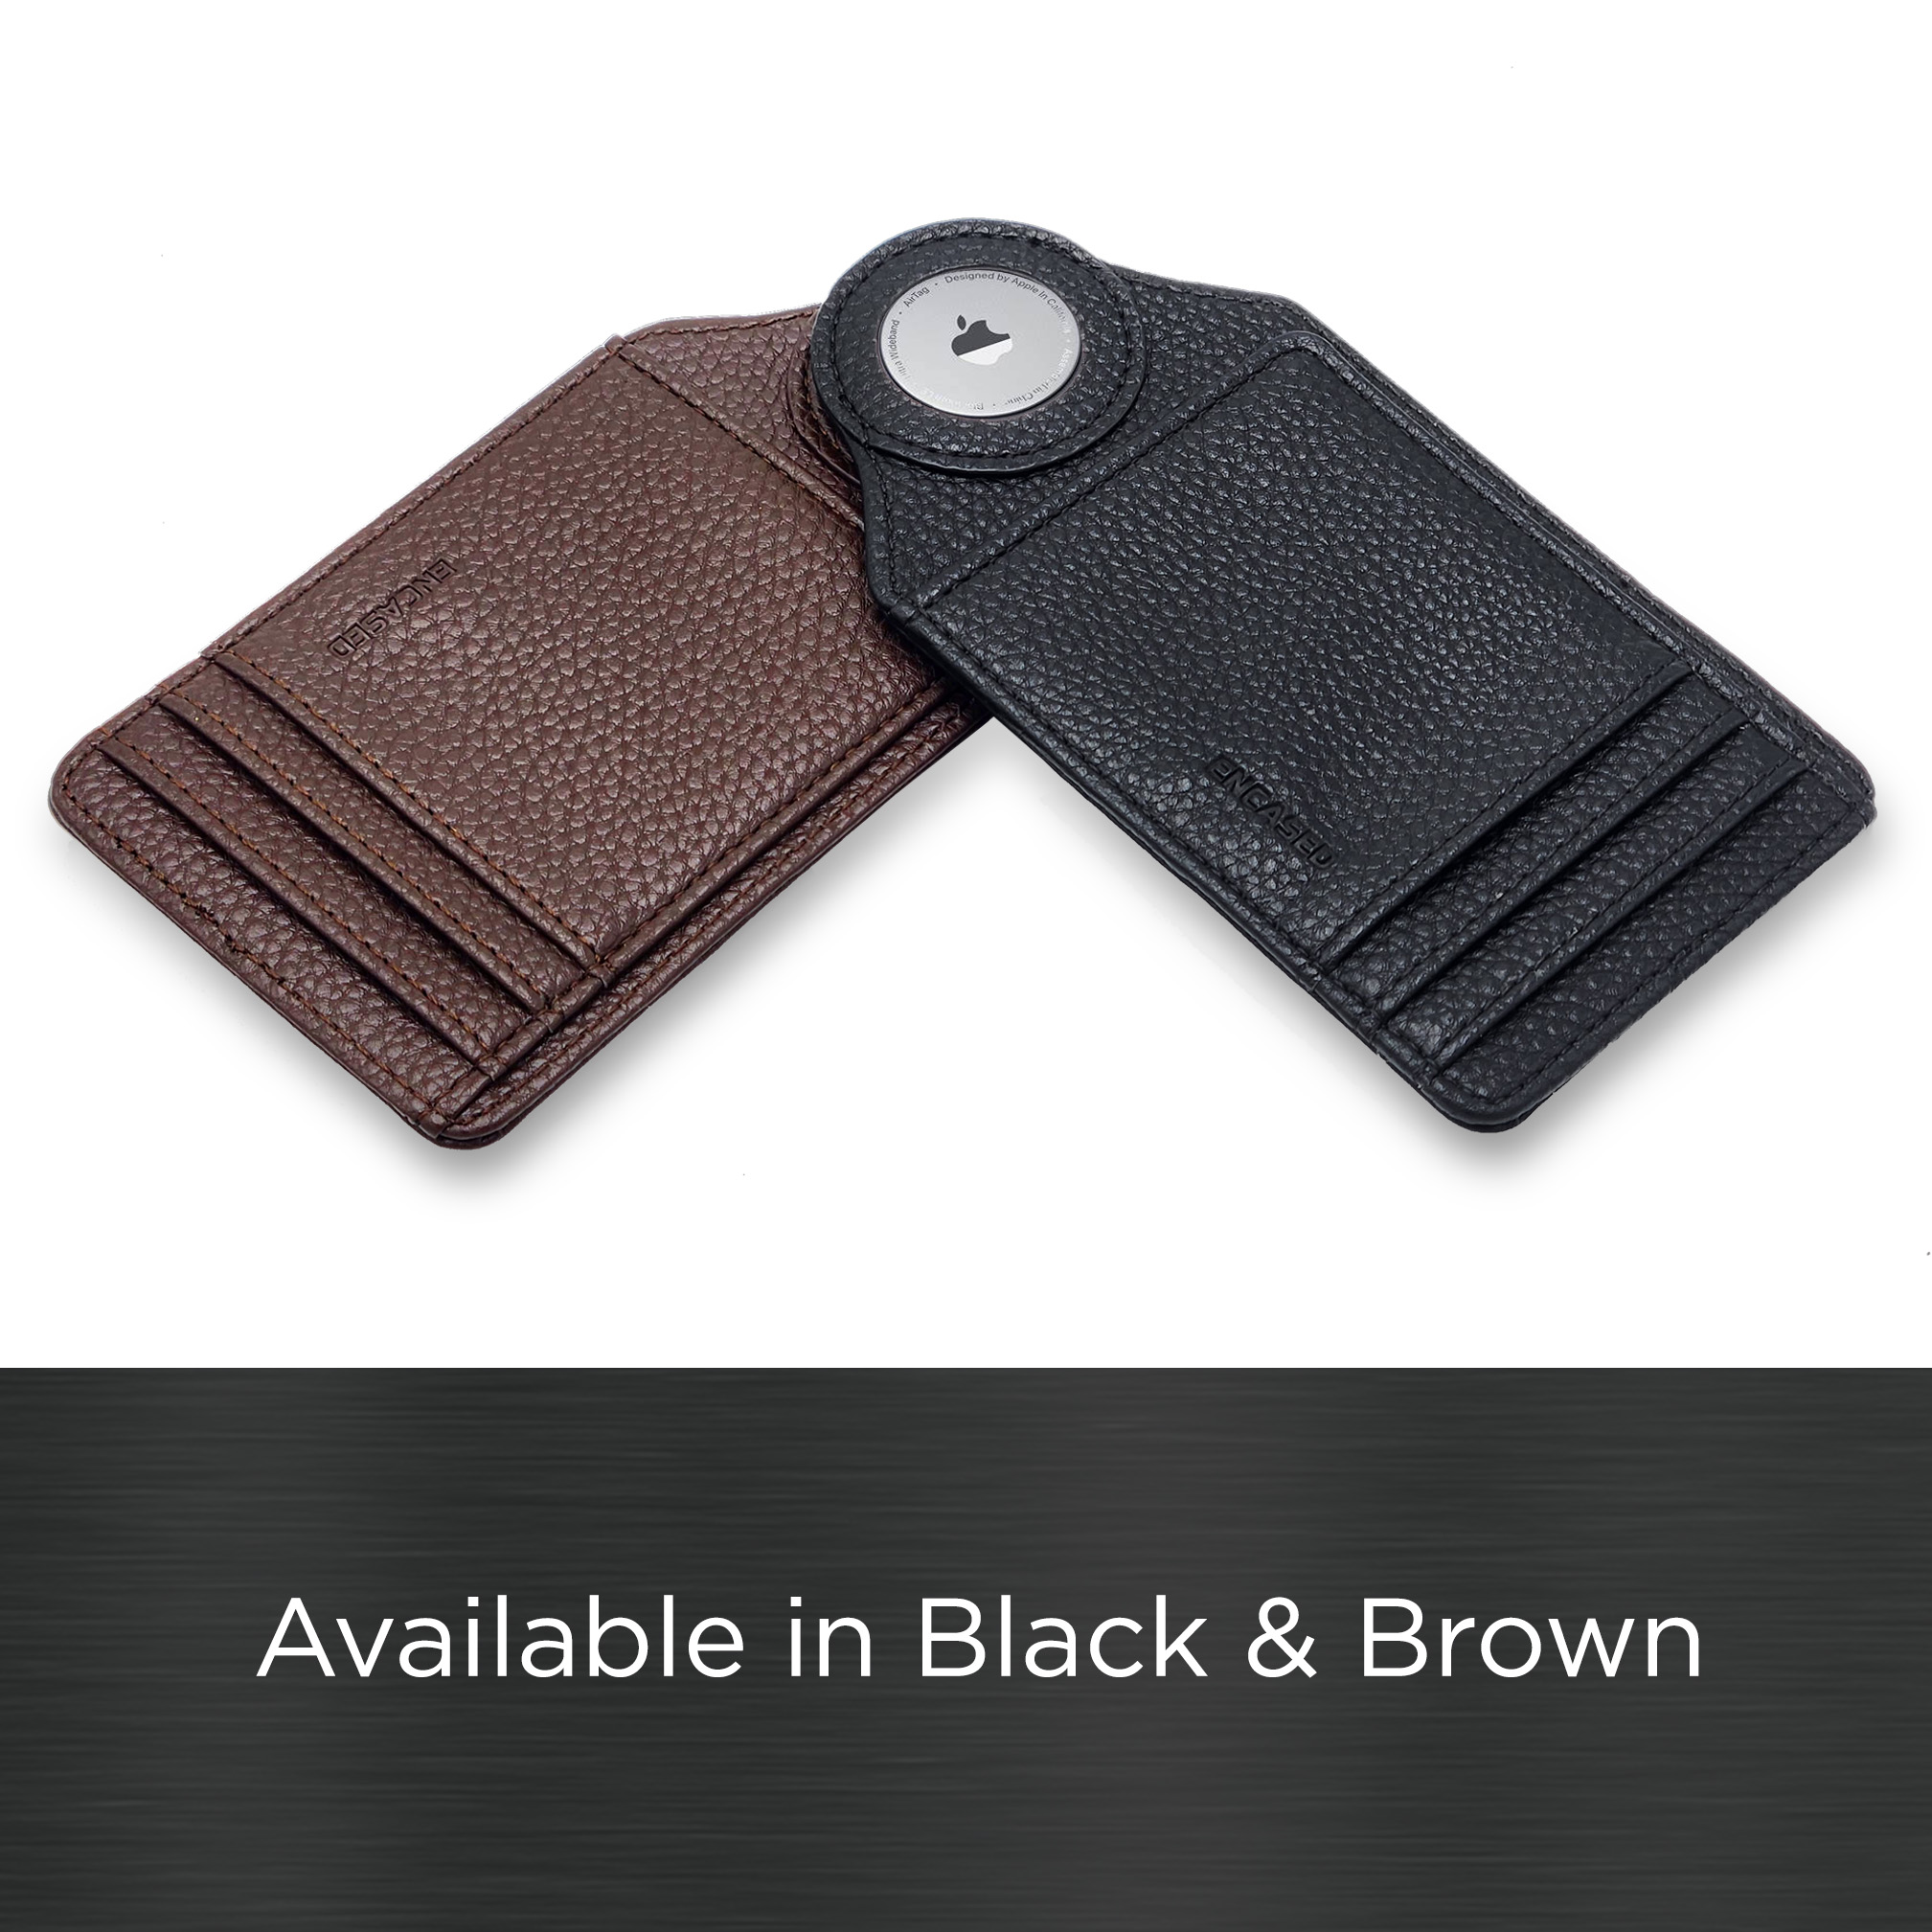  Airtag Wallet Holder 2 Pack,Ultra Thin Card Case for